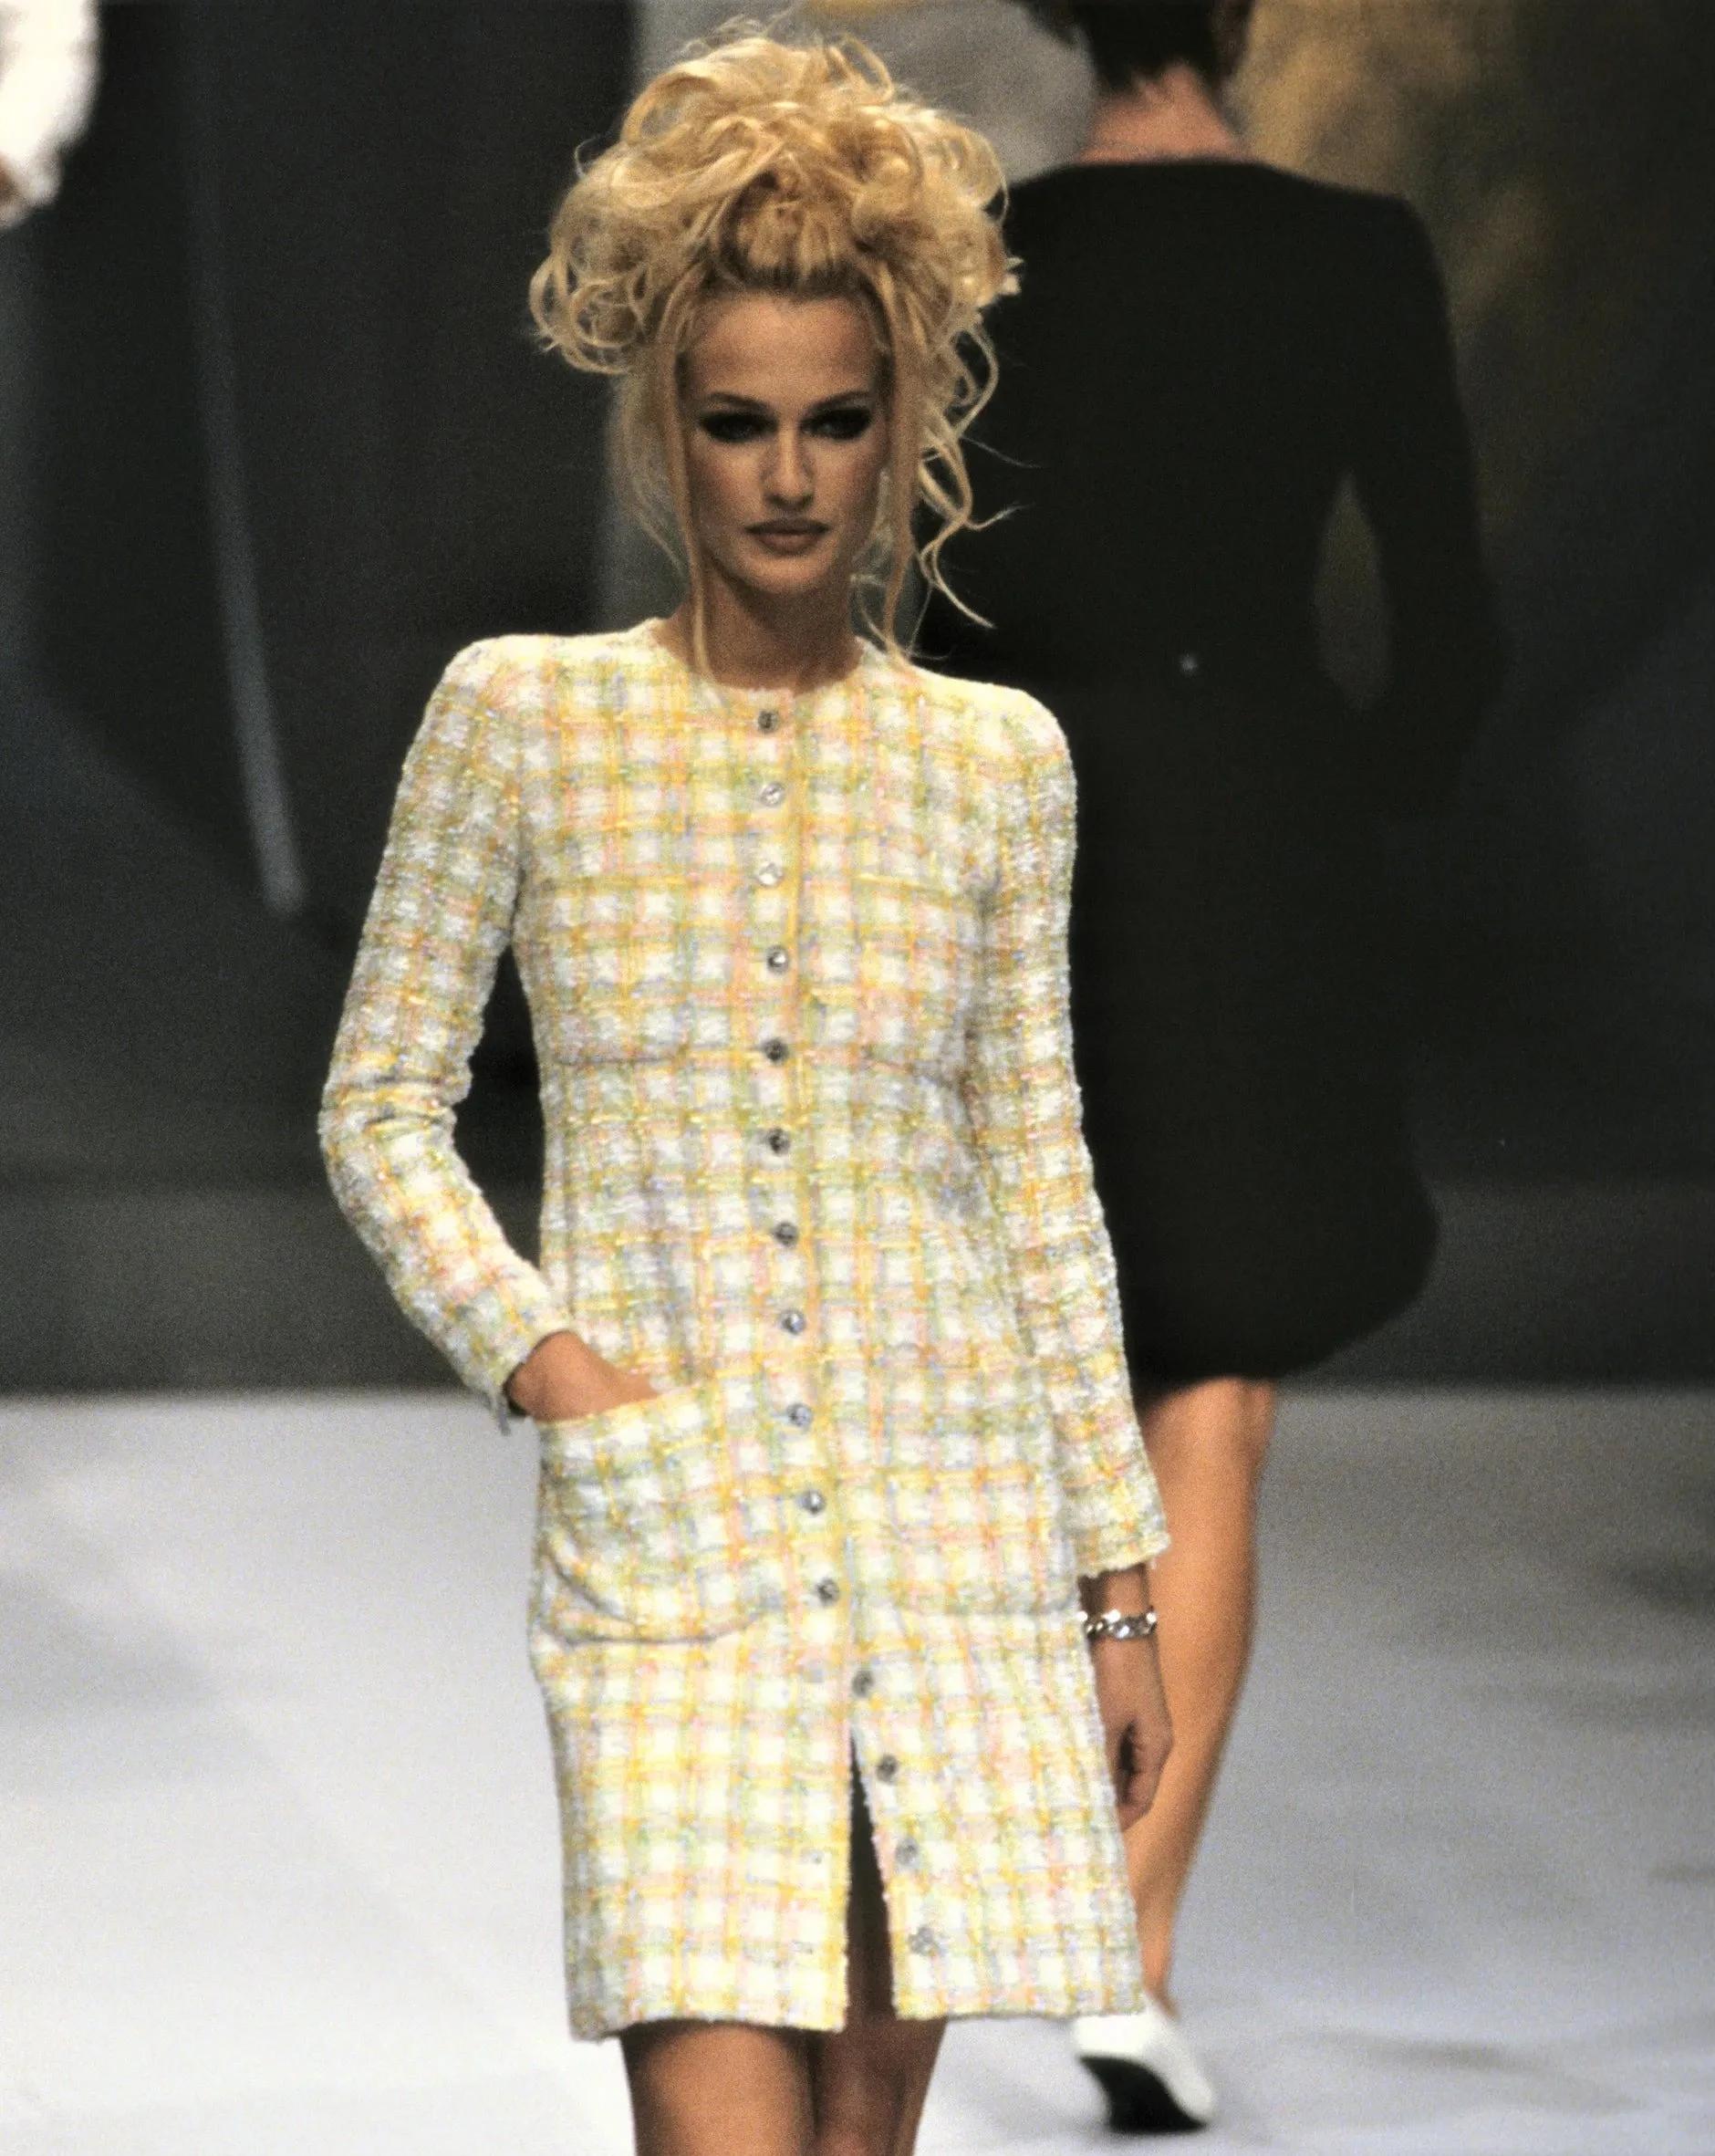 S/S 1996 Chanel by Karl Lagerfeld pastel yellow tweed mini blazer dress with pink and green contrast accents throughout. Button-up long blazer / dress with functional flap pockets at bust and hips. Silver tone buttons feature coin details. Fabric